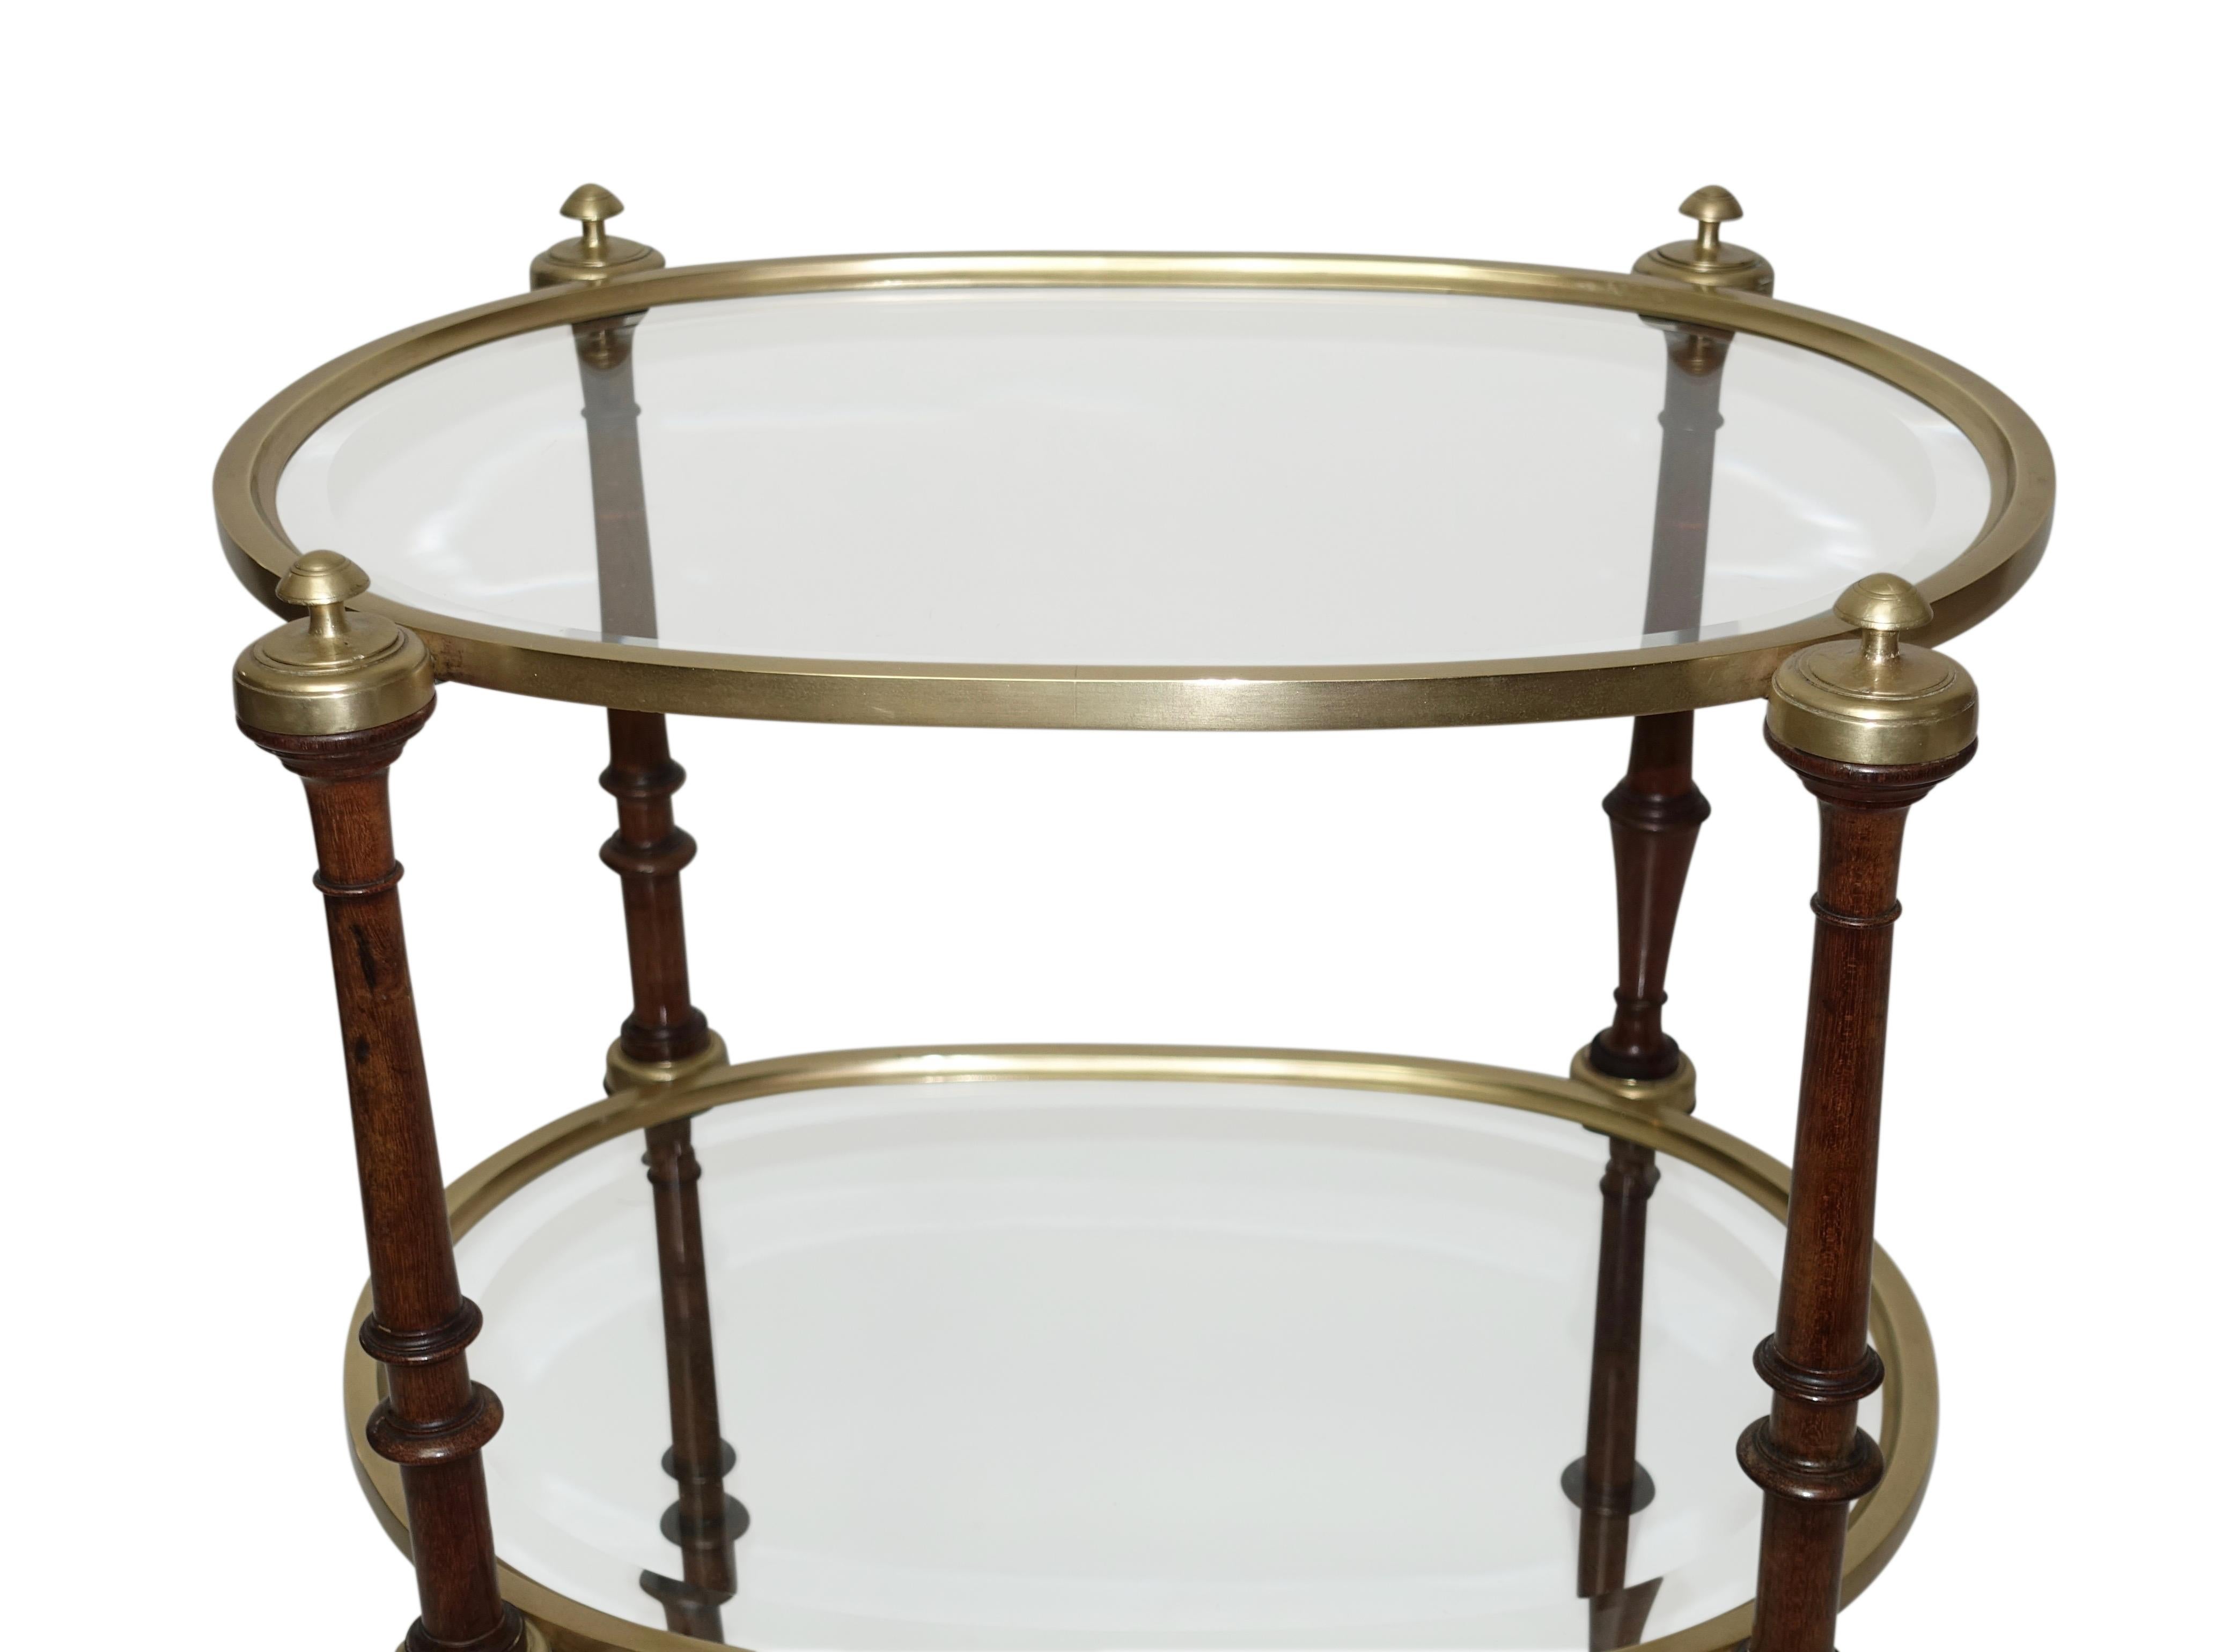 Mahogany Regency style brass three-tier side table with beveled glass top and lower shelves turned mahogany supports with brass trim ending with brass sabots, English, circa 1860.